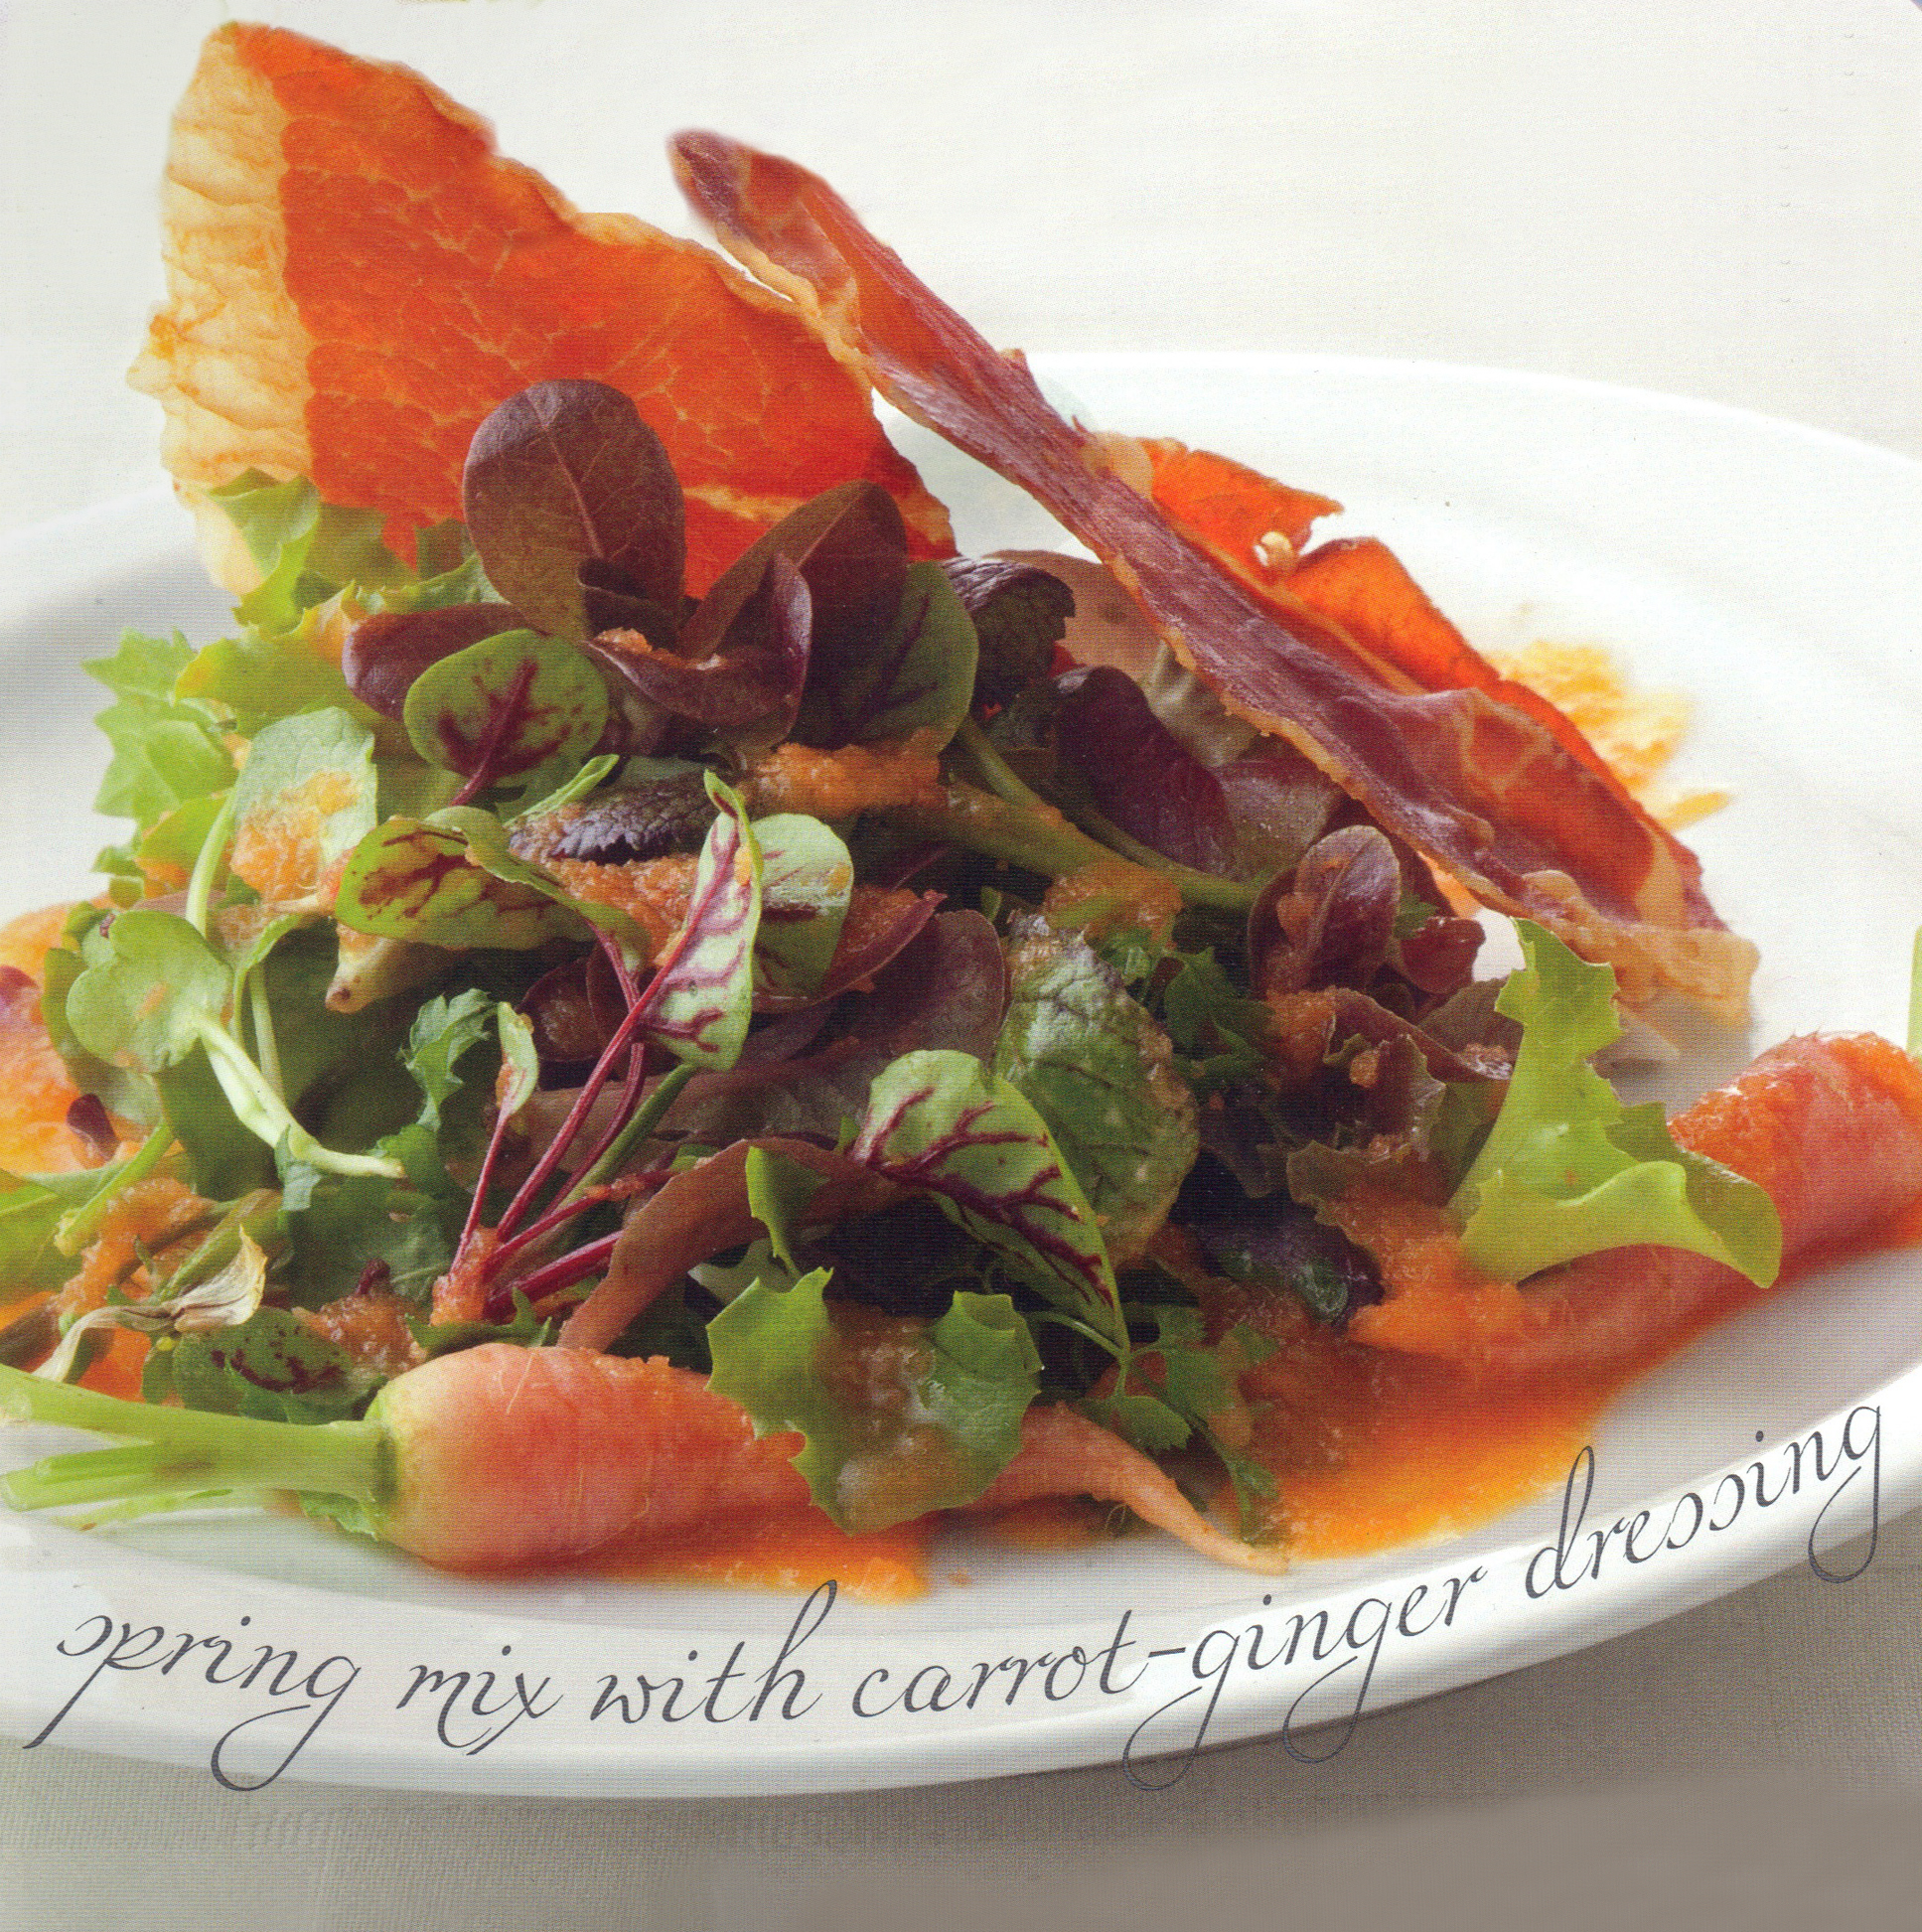 Spring Mix with Carrot-Ginger Dressing & Prosciutto "Bacon"